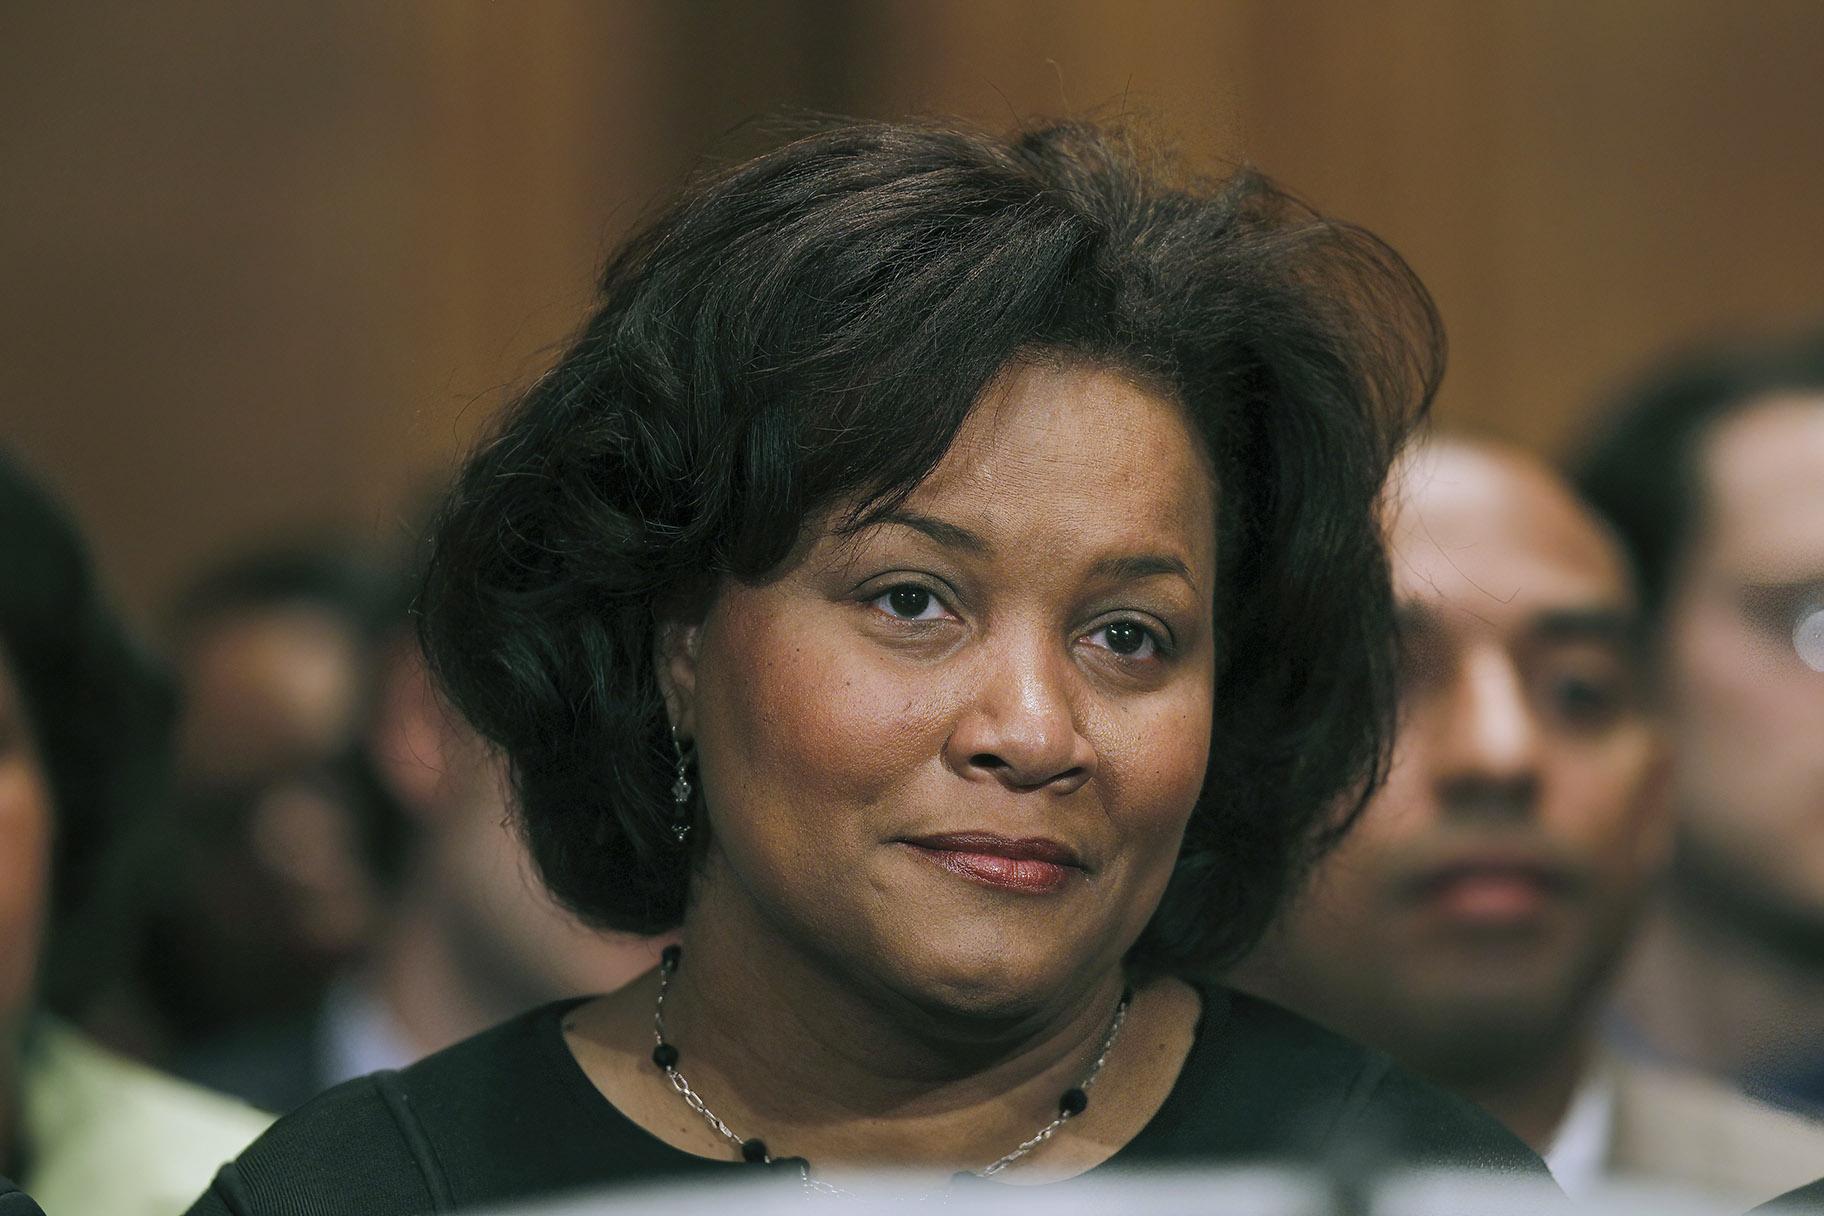  Judge J. Michelle Childs listens during her nomination hearing before the Senate Judiciary Committee on Capitol Hill in Washington, on April 16, 2010. (AP Photo / Charles Dharapak)